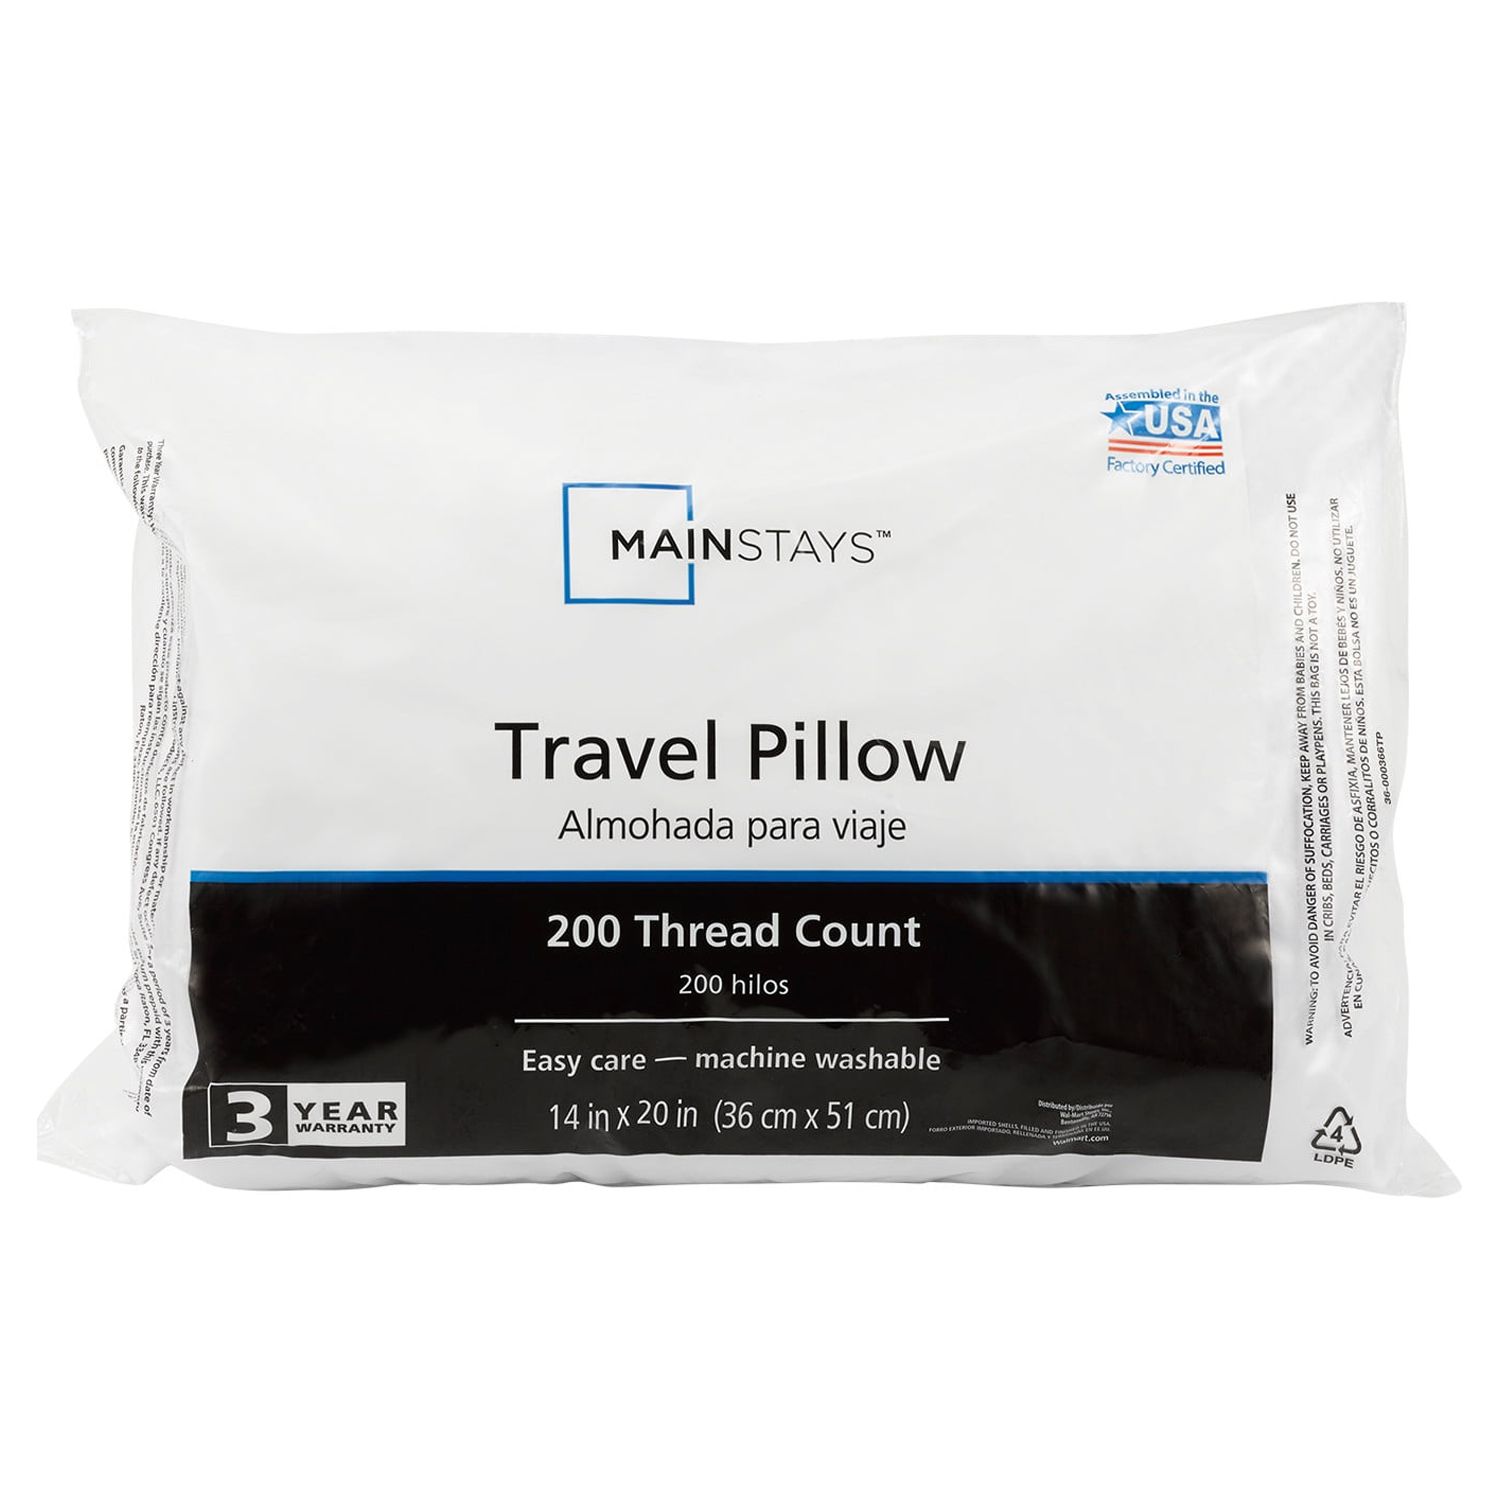 Mainstays Travel Pillow, 14" X 20", 2 Pack - image 1 of 7